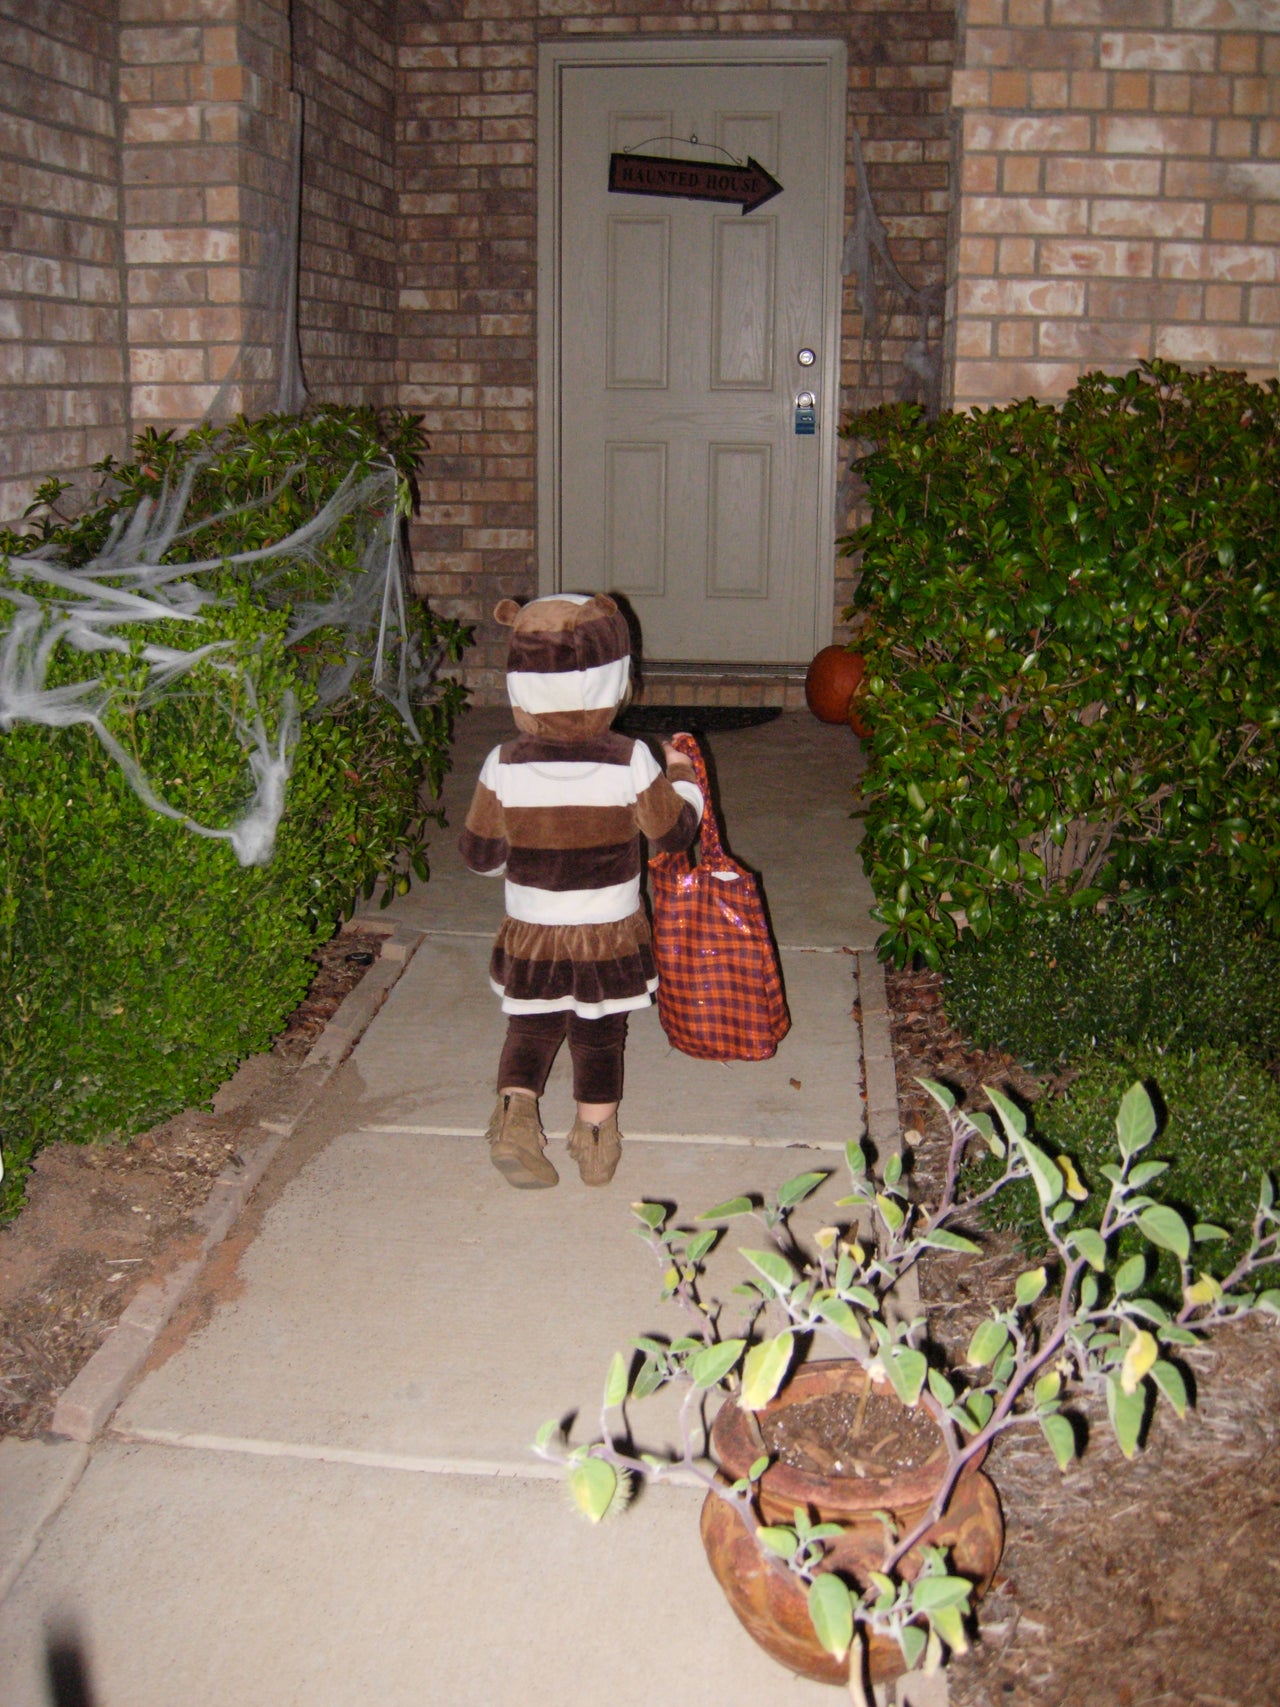 Introducing Trick-or-Treating to Your Anxious/Sensitive Child